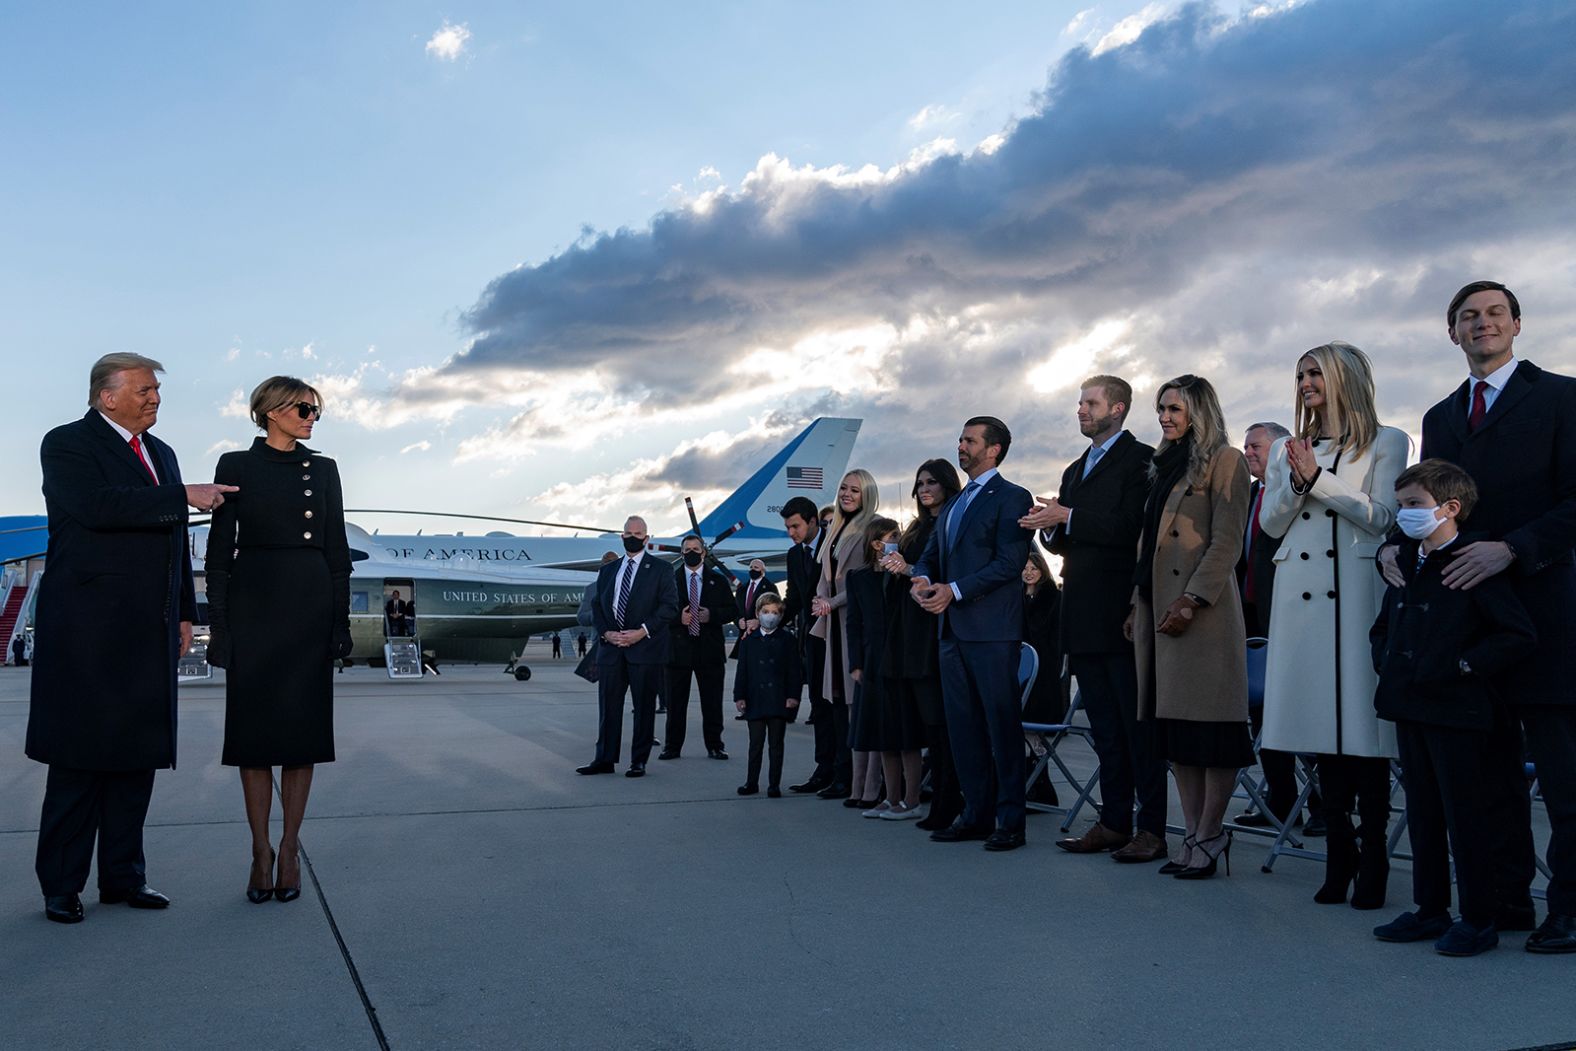 Trump acknowledges his children and other family members on the tarmac of Joint Base Andrews before heading to Florida and skipping <a href="index.php?page=&url=https%3A%2F%2Fwww.cnn.com%2F2021%2F01%2F19%2Fpolitics%2Fgallery%2Fjoe-biden-inauguration-photos%2Findex.html" target="_blank">the inauguration of Joe Biden.</a> "I will always fight for you," <a href="index.php?page=&url=https%3A%2F%2Fwww.cnn.com%2Fpolitics%2Flive-news%2Fbiden-harris-inauguration-day-2021%2Fh_c7d52b0352ef4bfed902fd3b12d8a24b" target="_blank">he said in front of a crowd of family and friends.</a> "I will be watching. I will be listening, and I will tell you that the future of this country has never been better. I wish the new administration great luck and great success. I think they'll have great success. They have the foundation to do something really spectacular."